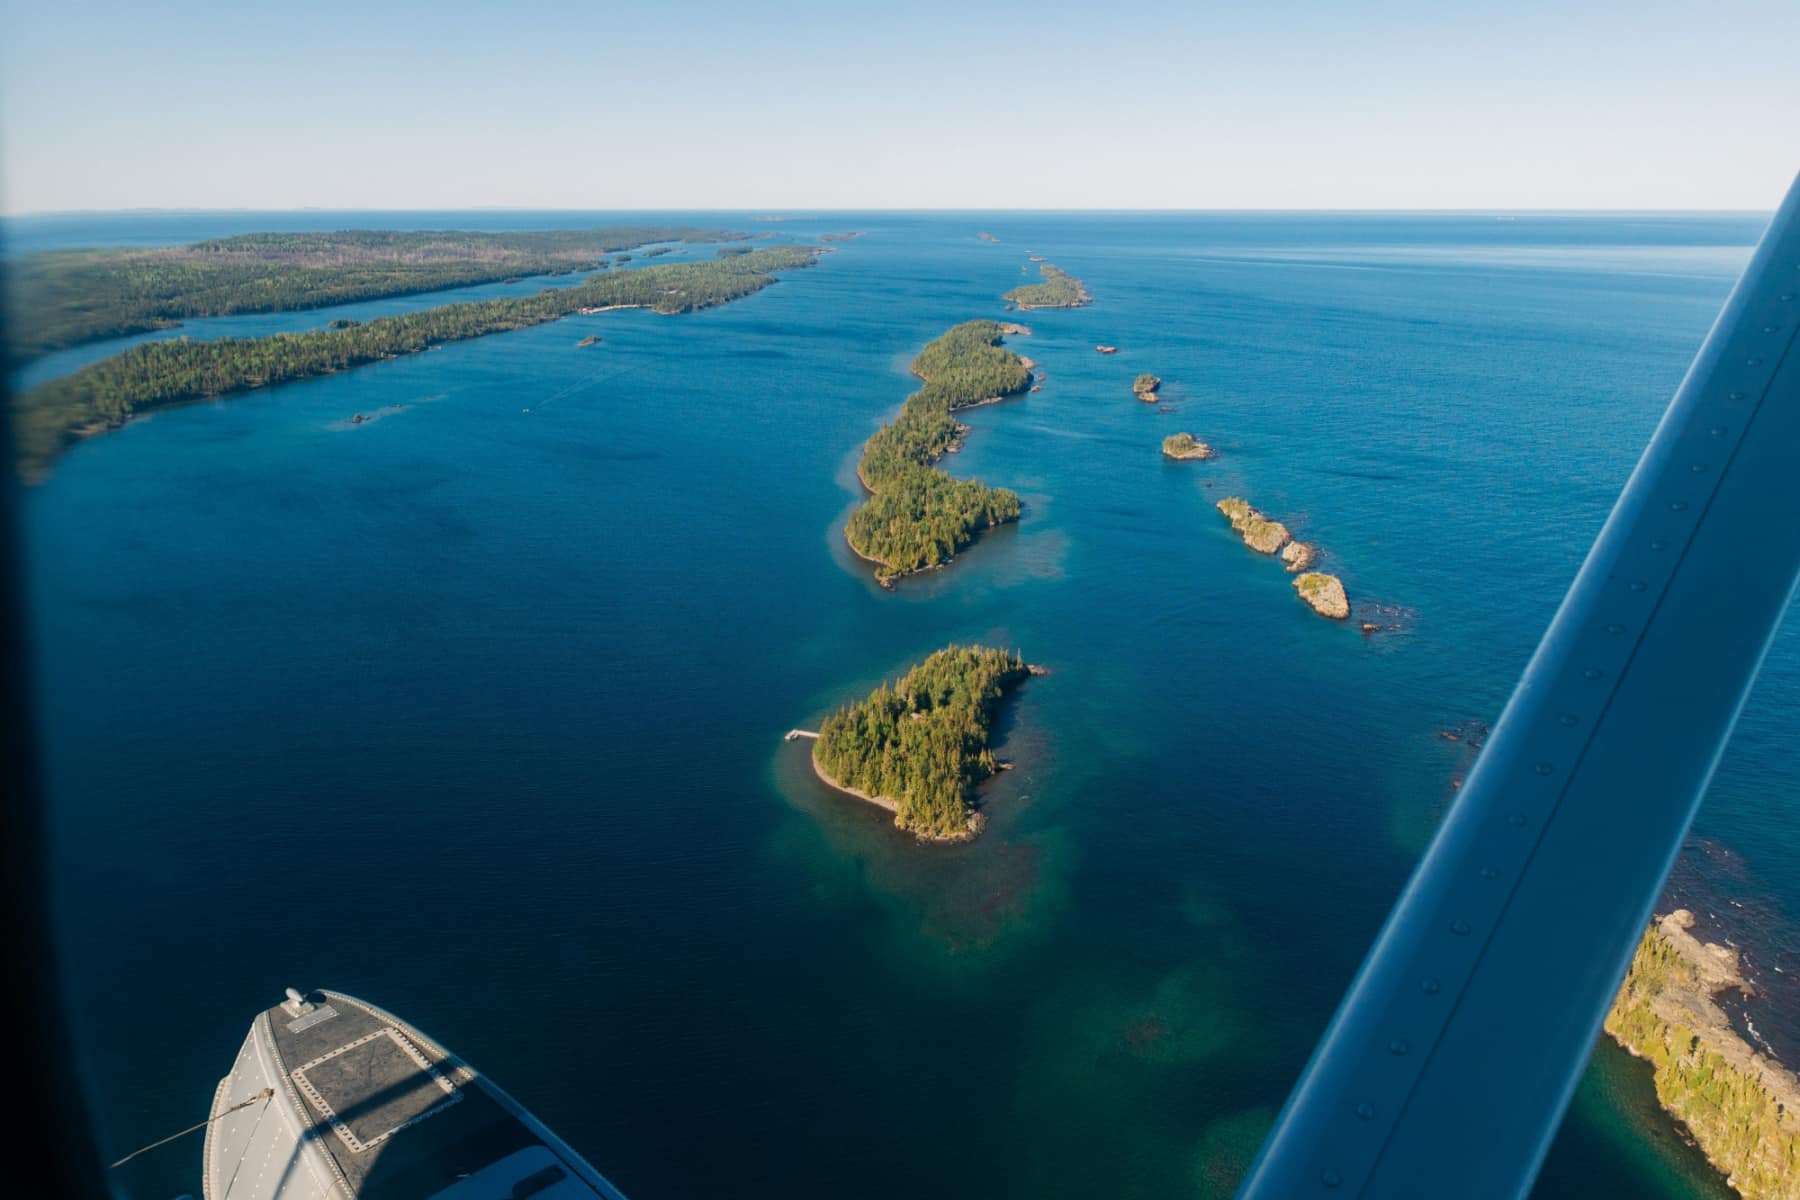 Isle Royale National Park as seen from a seaplane.